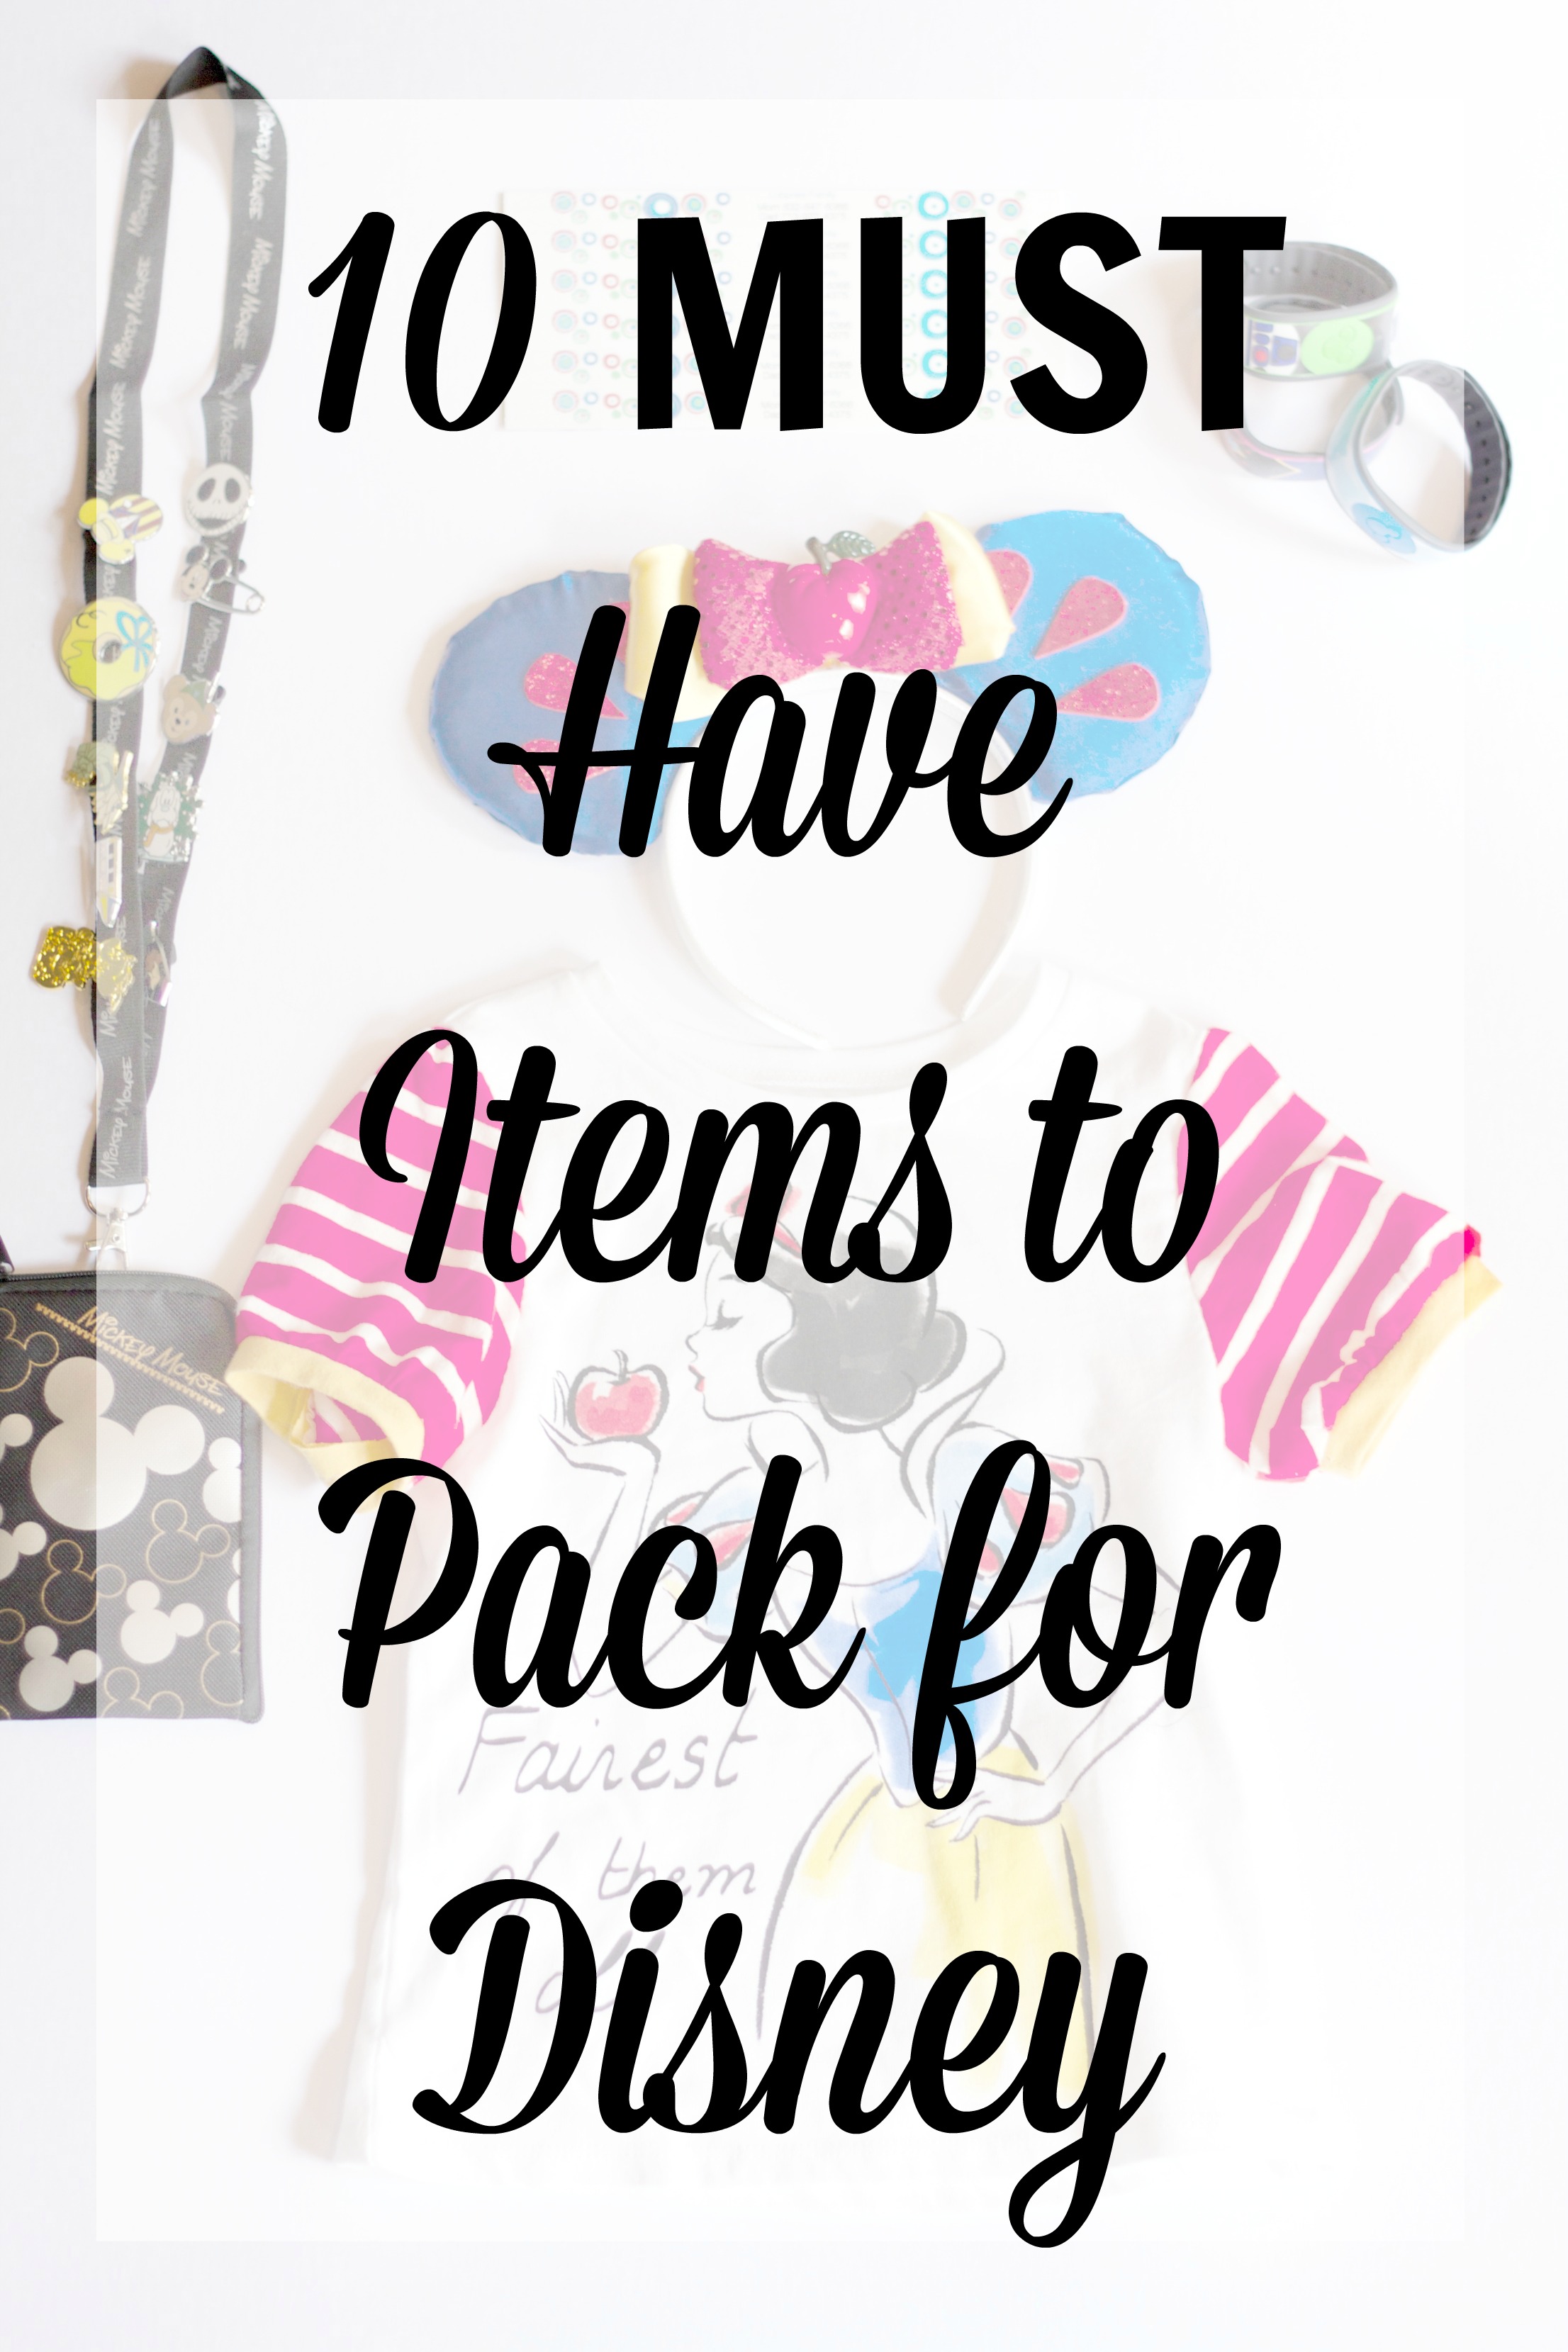 10 Must Have Items to Pack for Disney, Disney World Packing